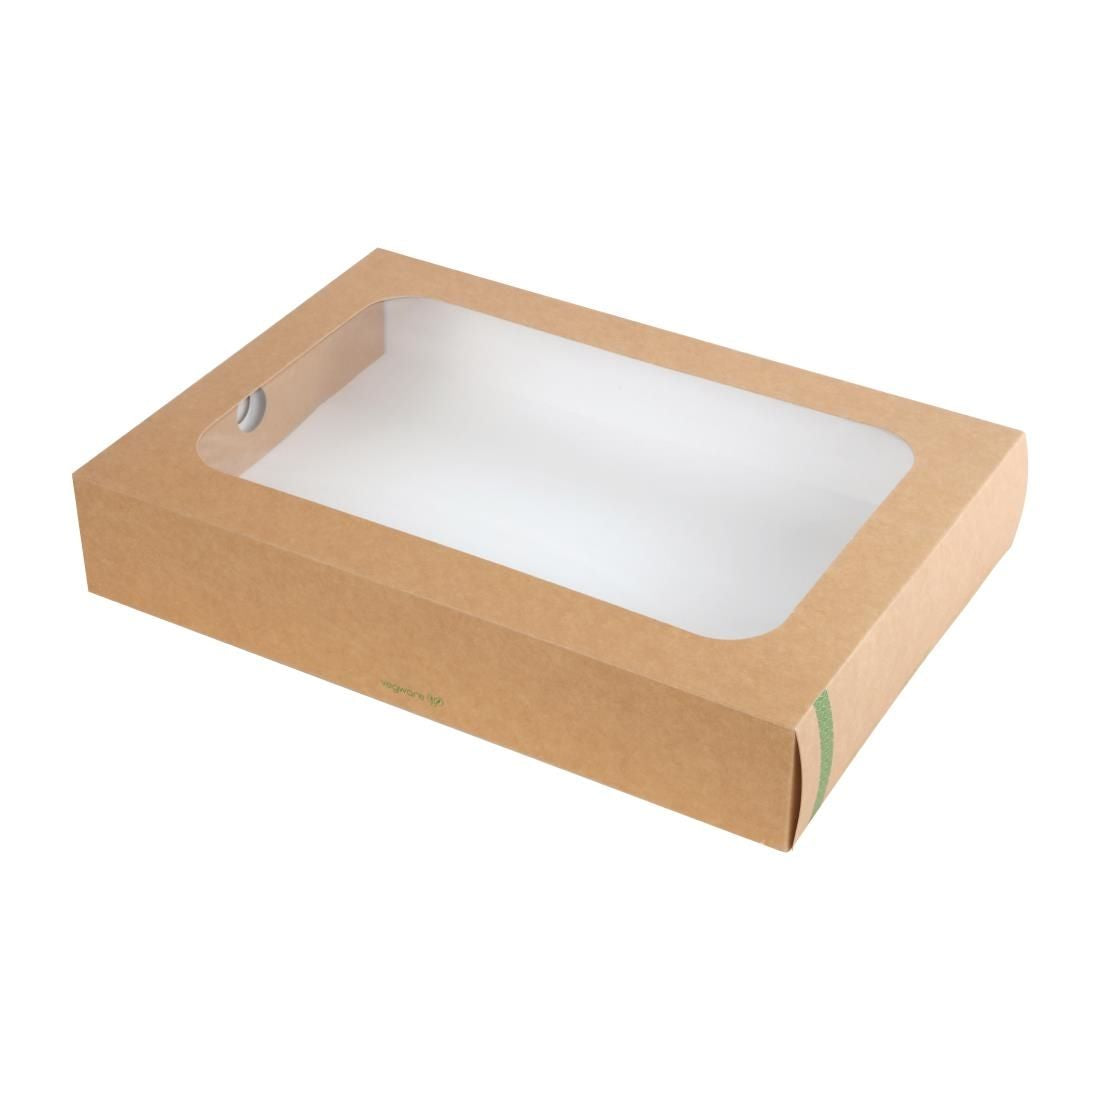 FD387 Vegware Compostable Sandwich Platters With Lid Large (Pack of 25)